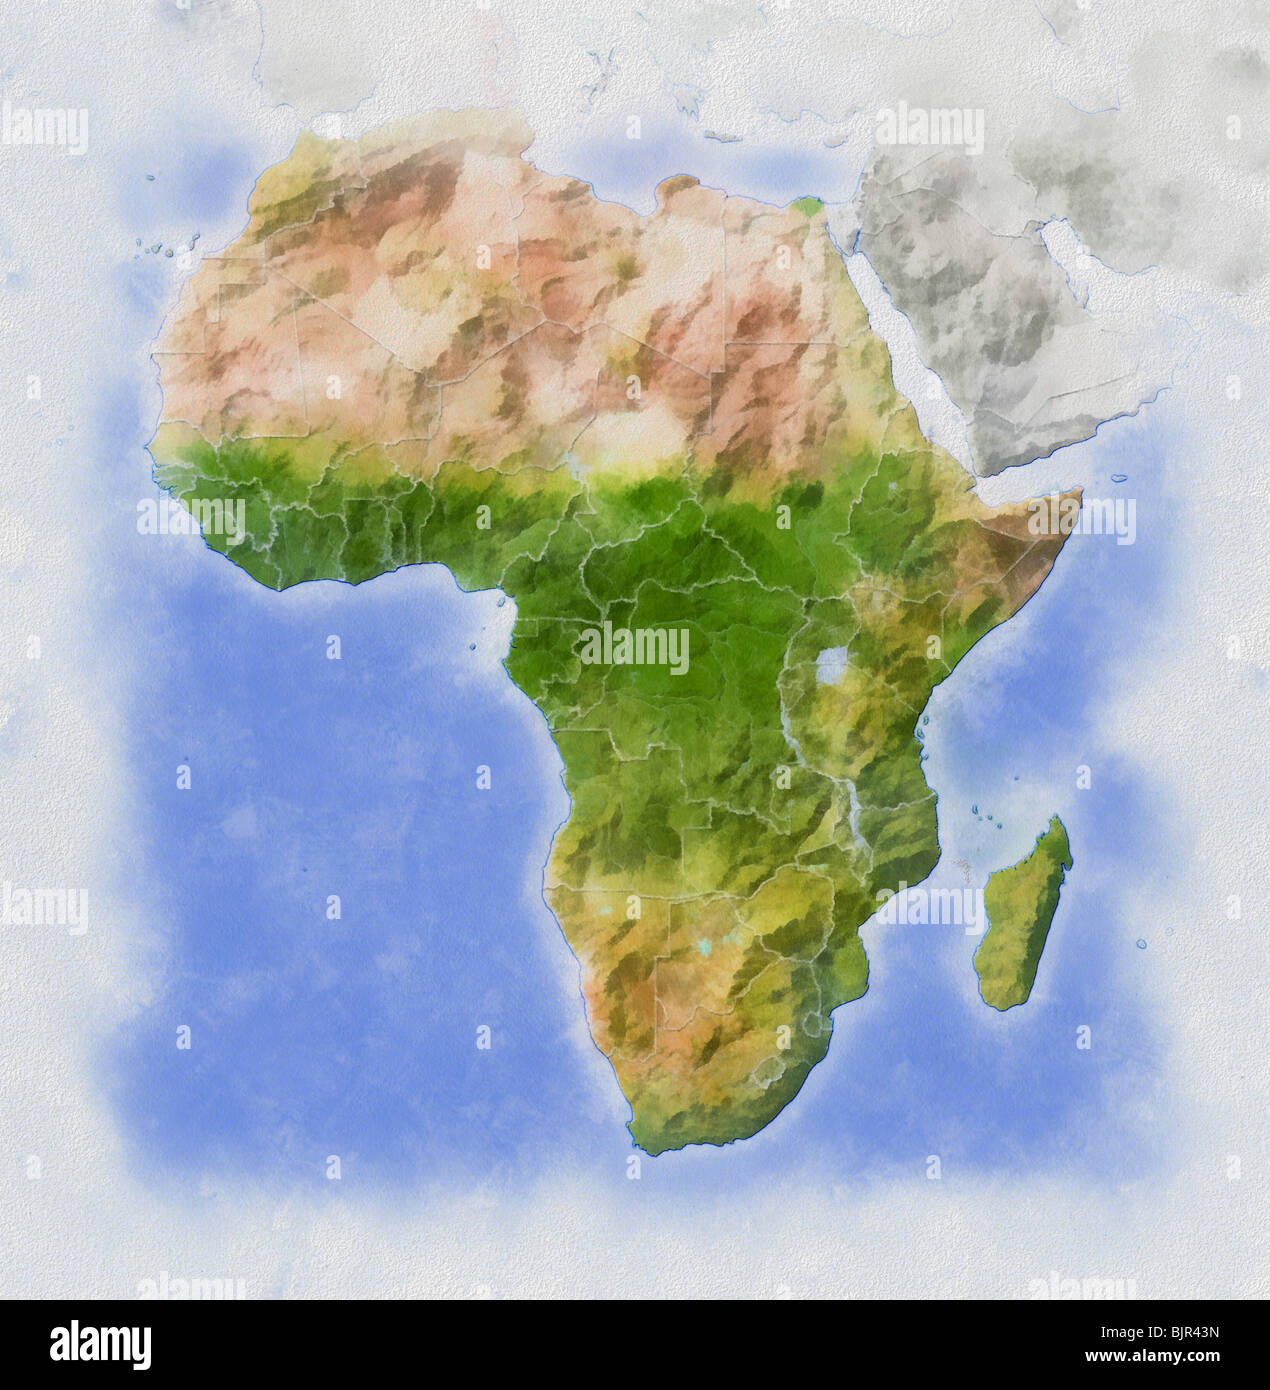 Africa, relief map in water colors. Stock Photo